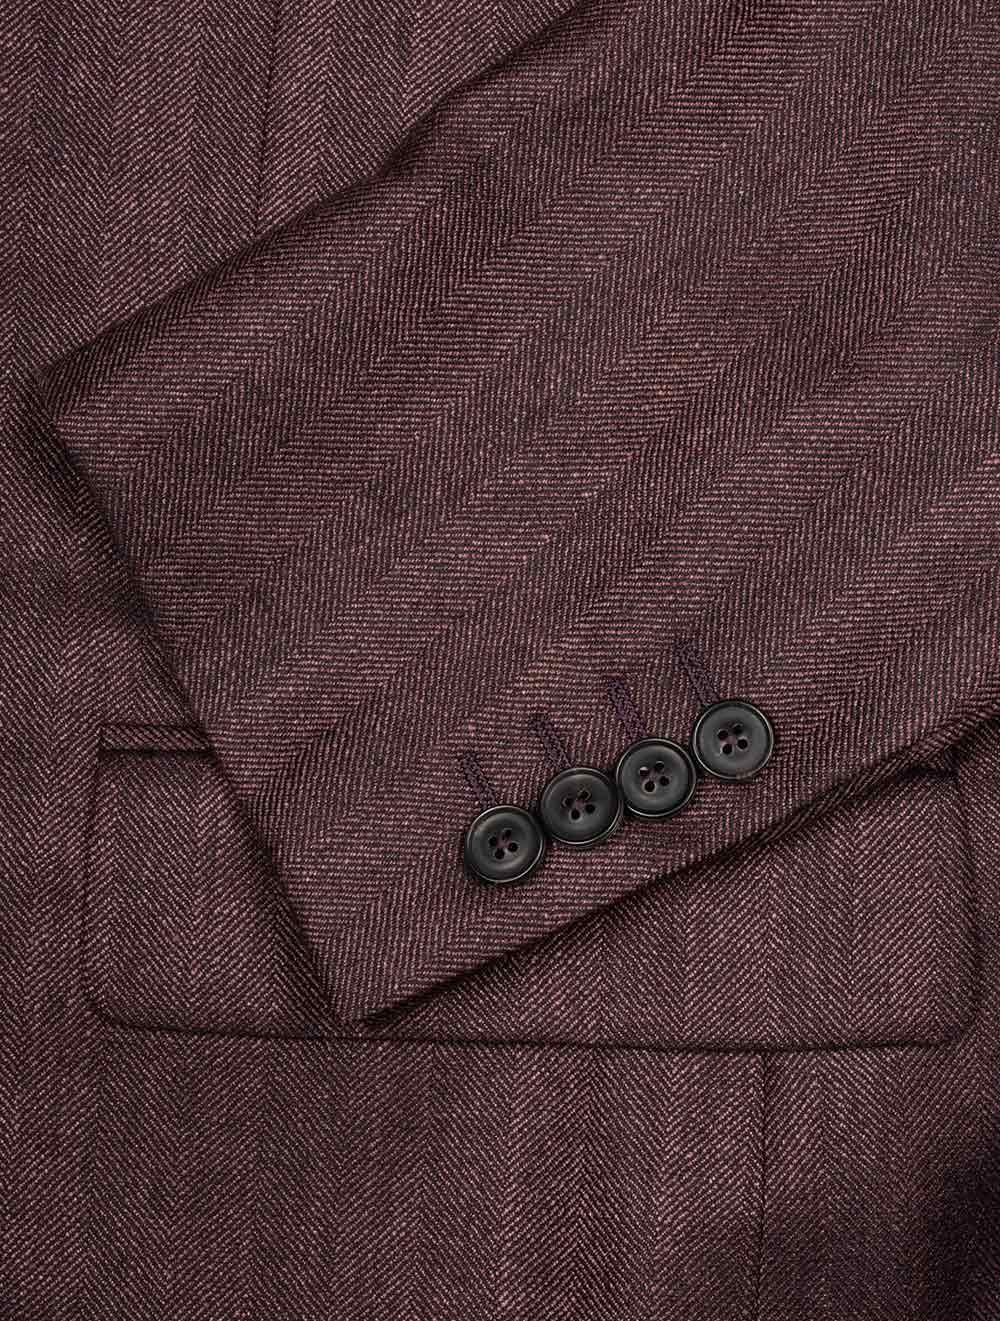 Canali Silk Cashmere Herringbone Jacket Wine 2 Button Single Breasted Soft Shoulder Fully Lined 4